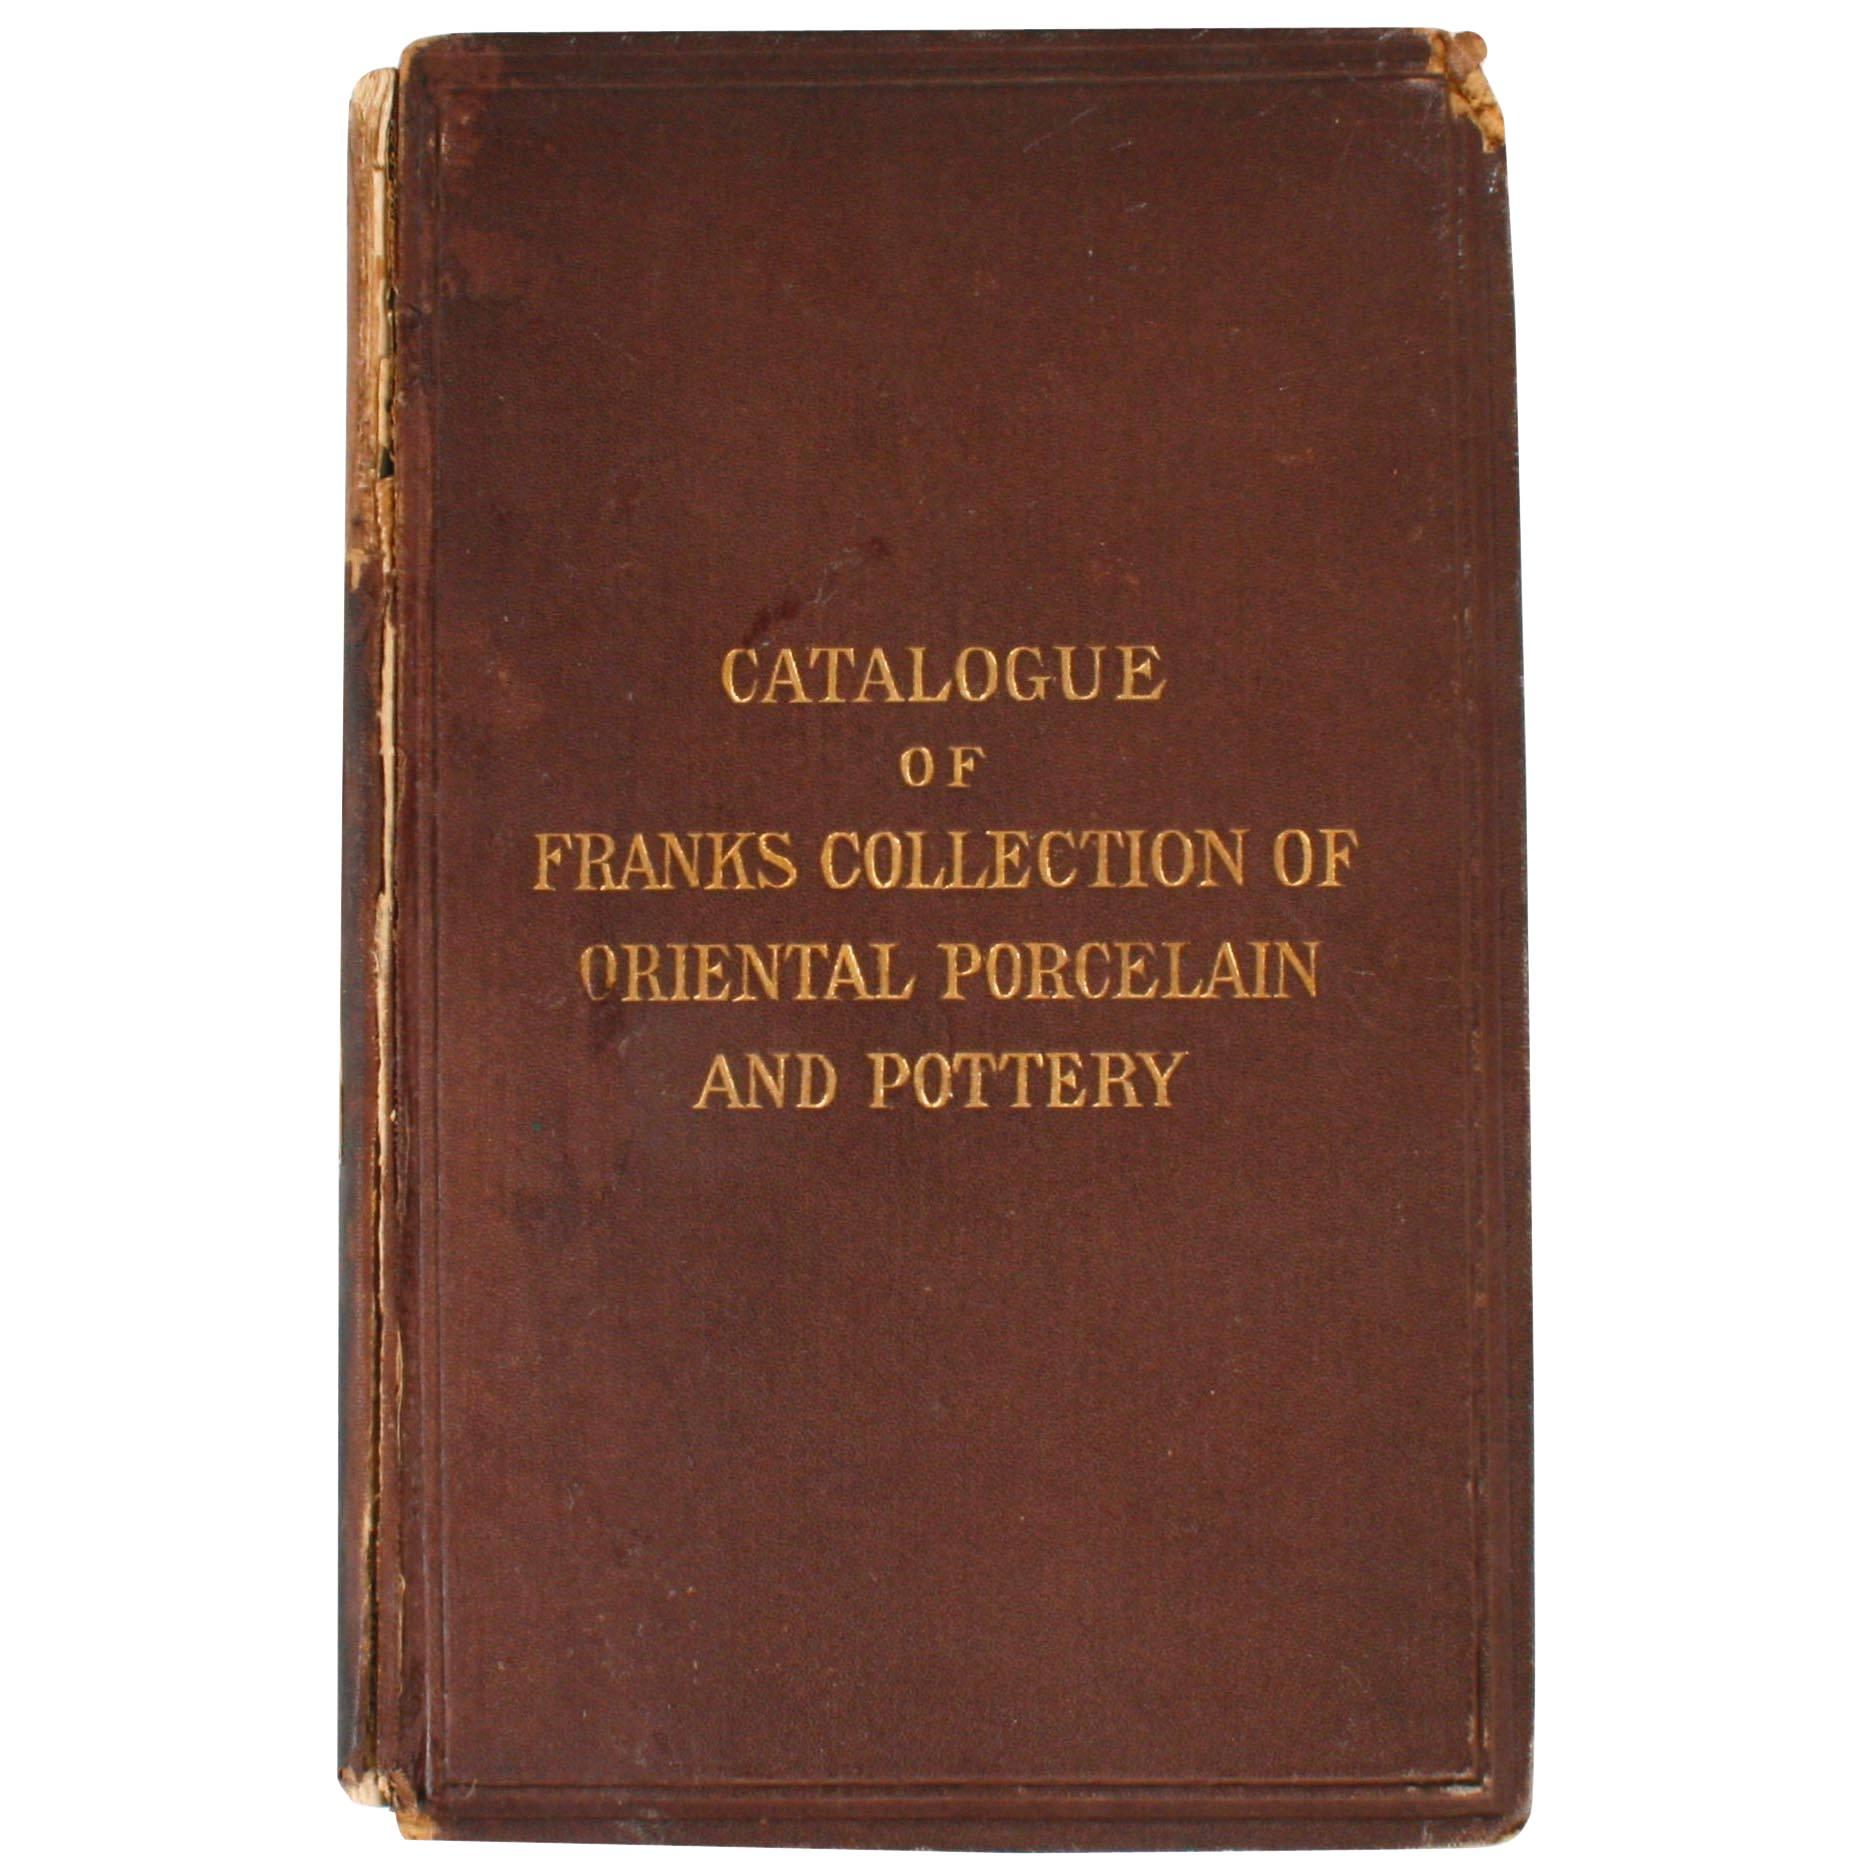 Catalogue of Franks Collection of Oriental Porcelain and Pottery, Rare Original